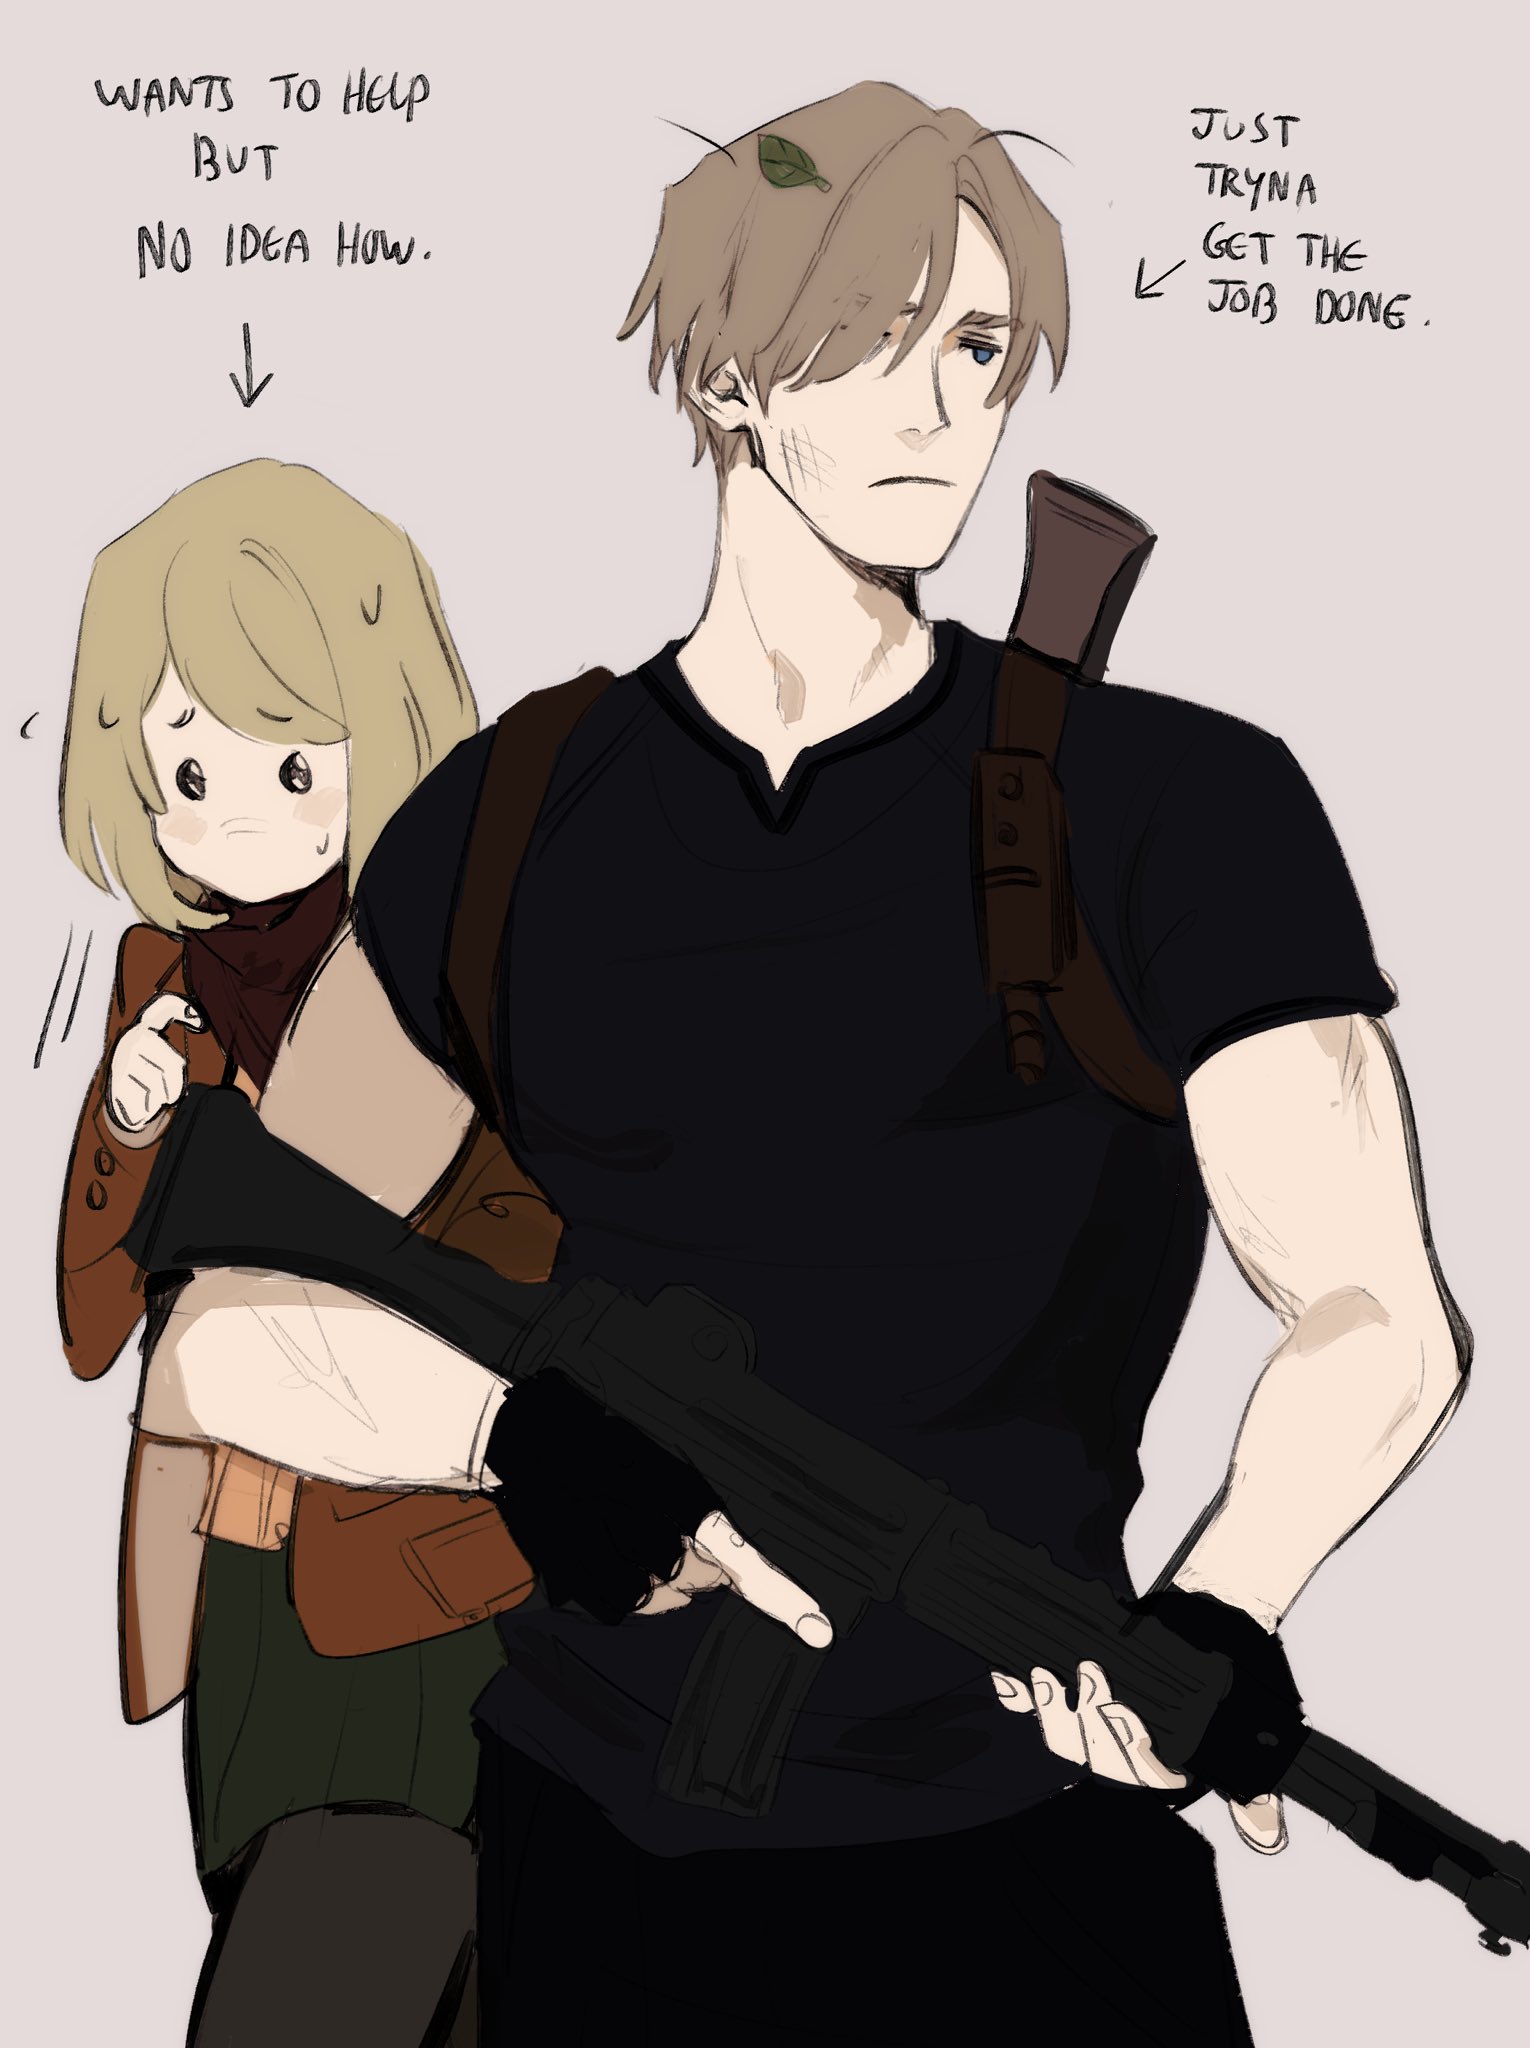 leon s. kennedy and ashley graham (resident evil and 2 more) drawn